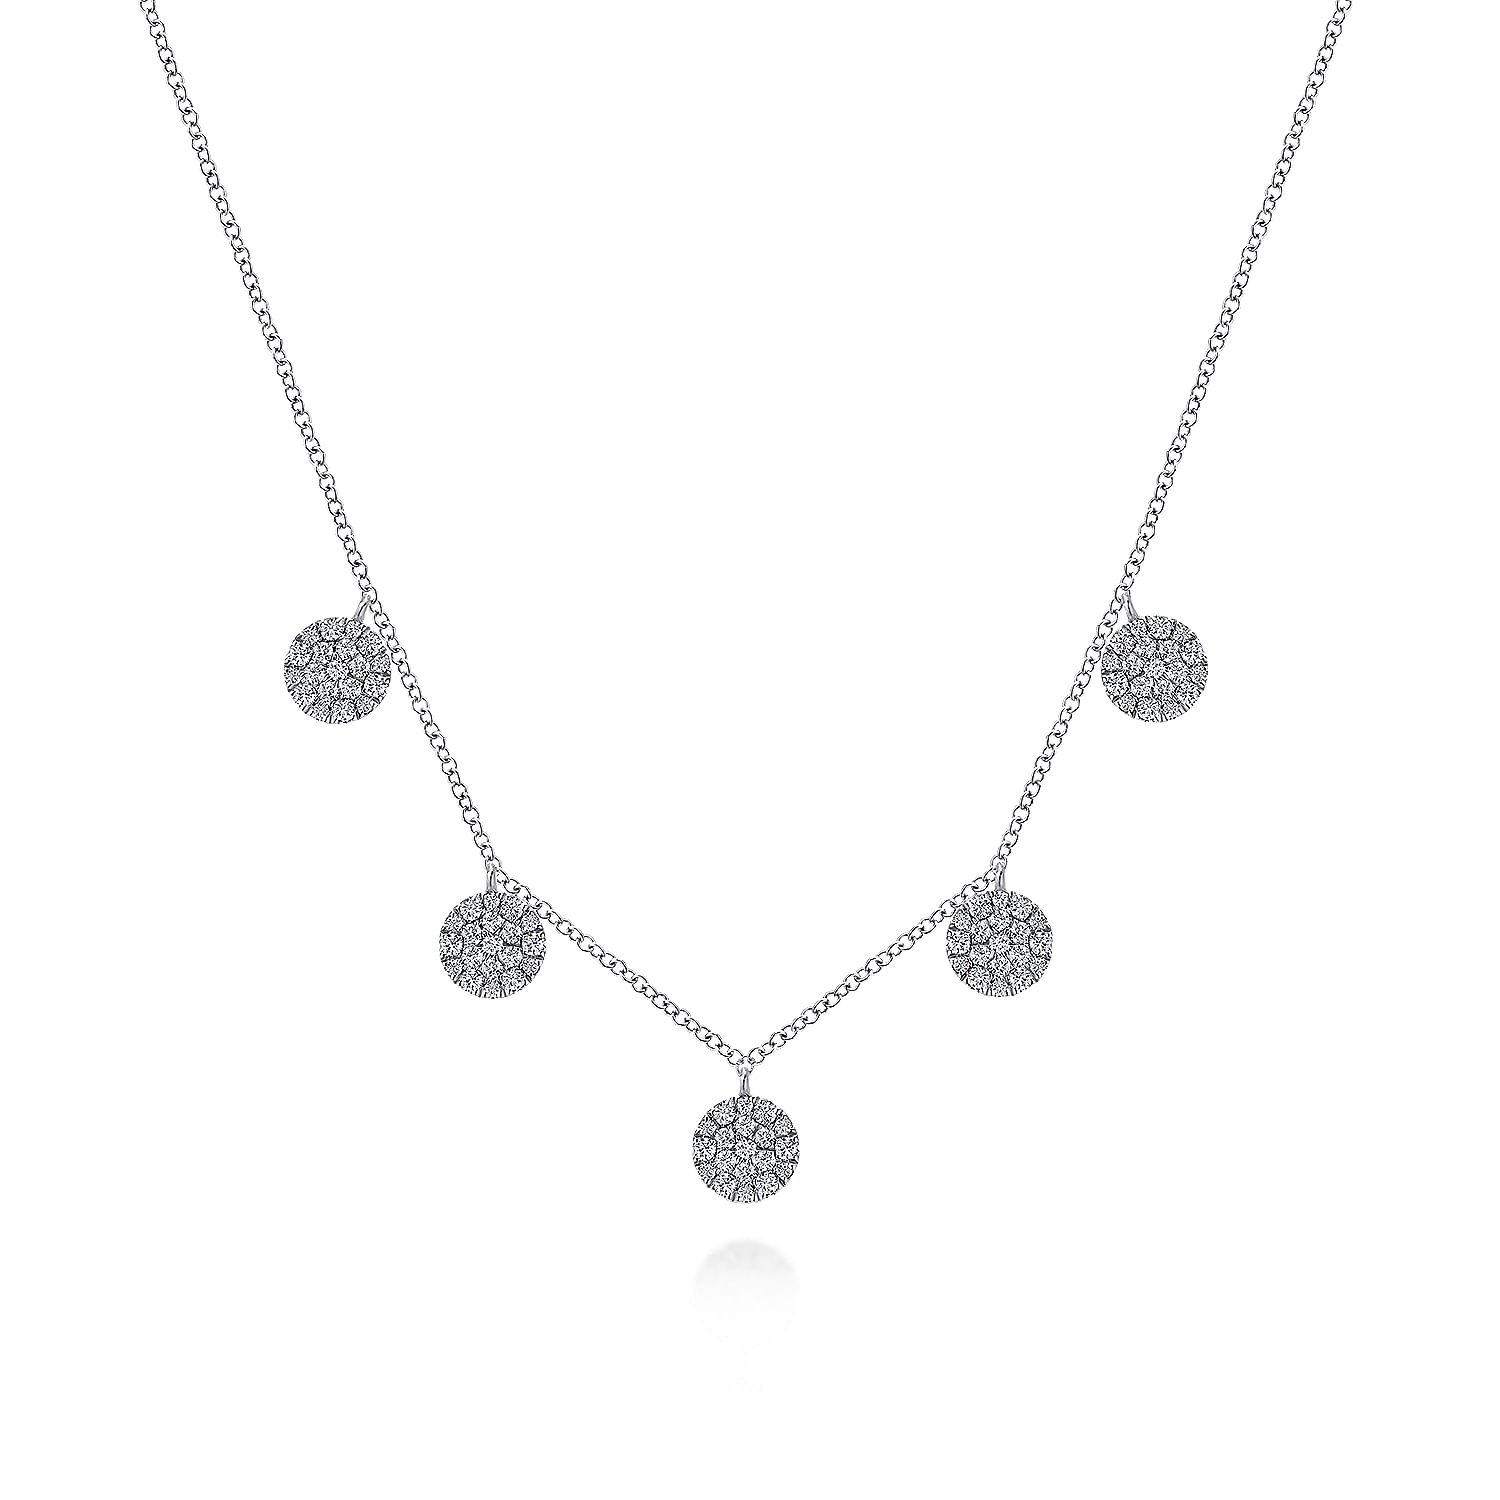 14K White Gold Necklace with Round Diamond Pavé Disc Drops